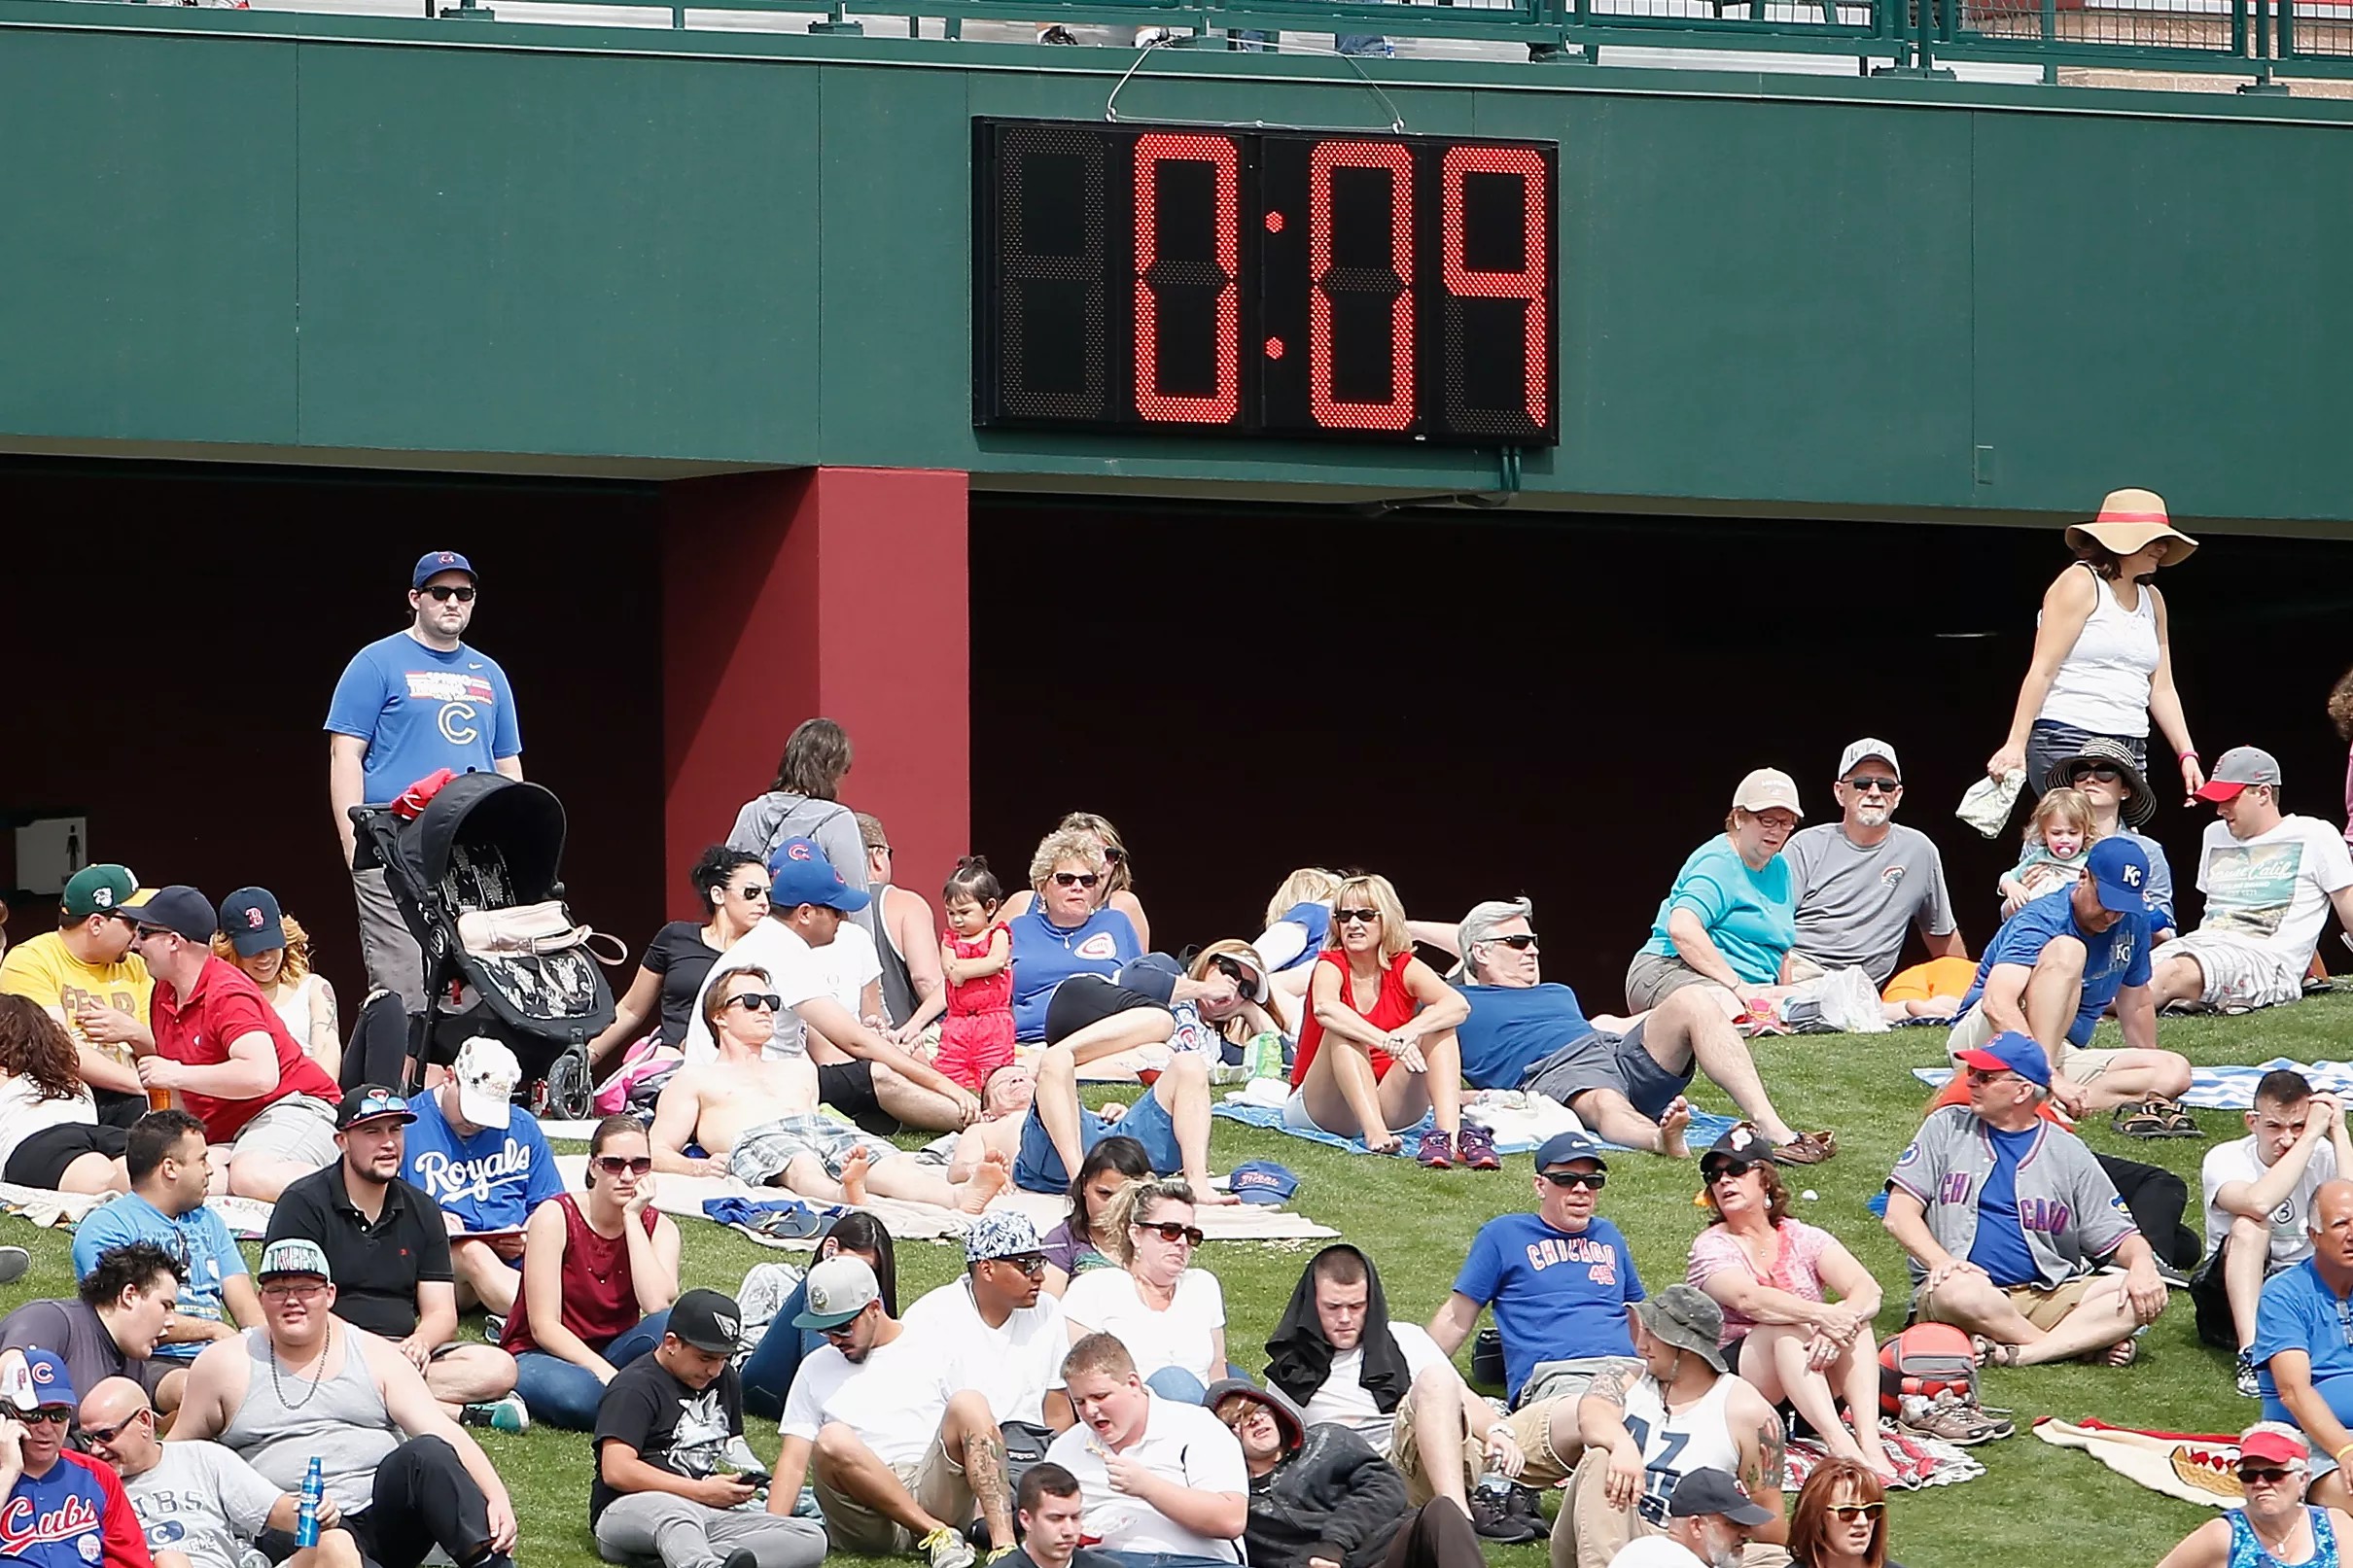 Here are some details about MLB’s new pitch clocks